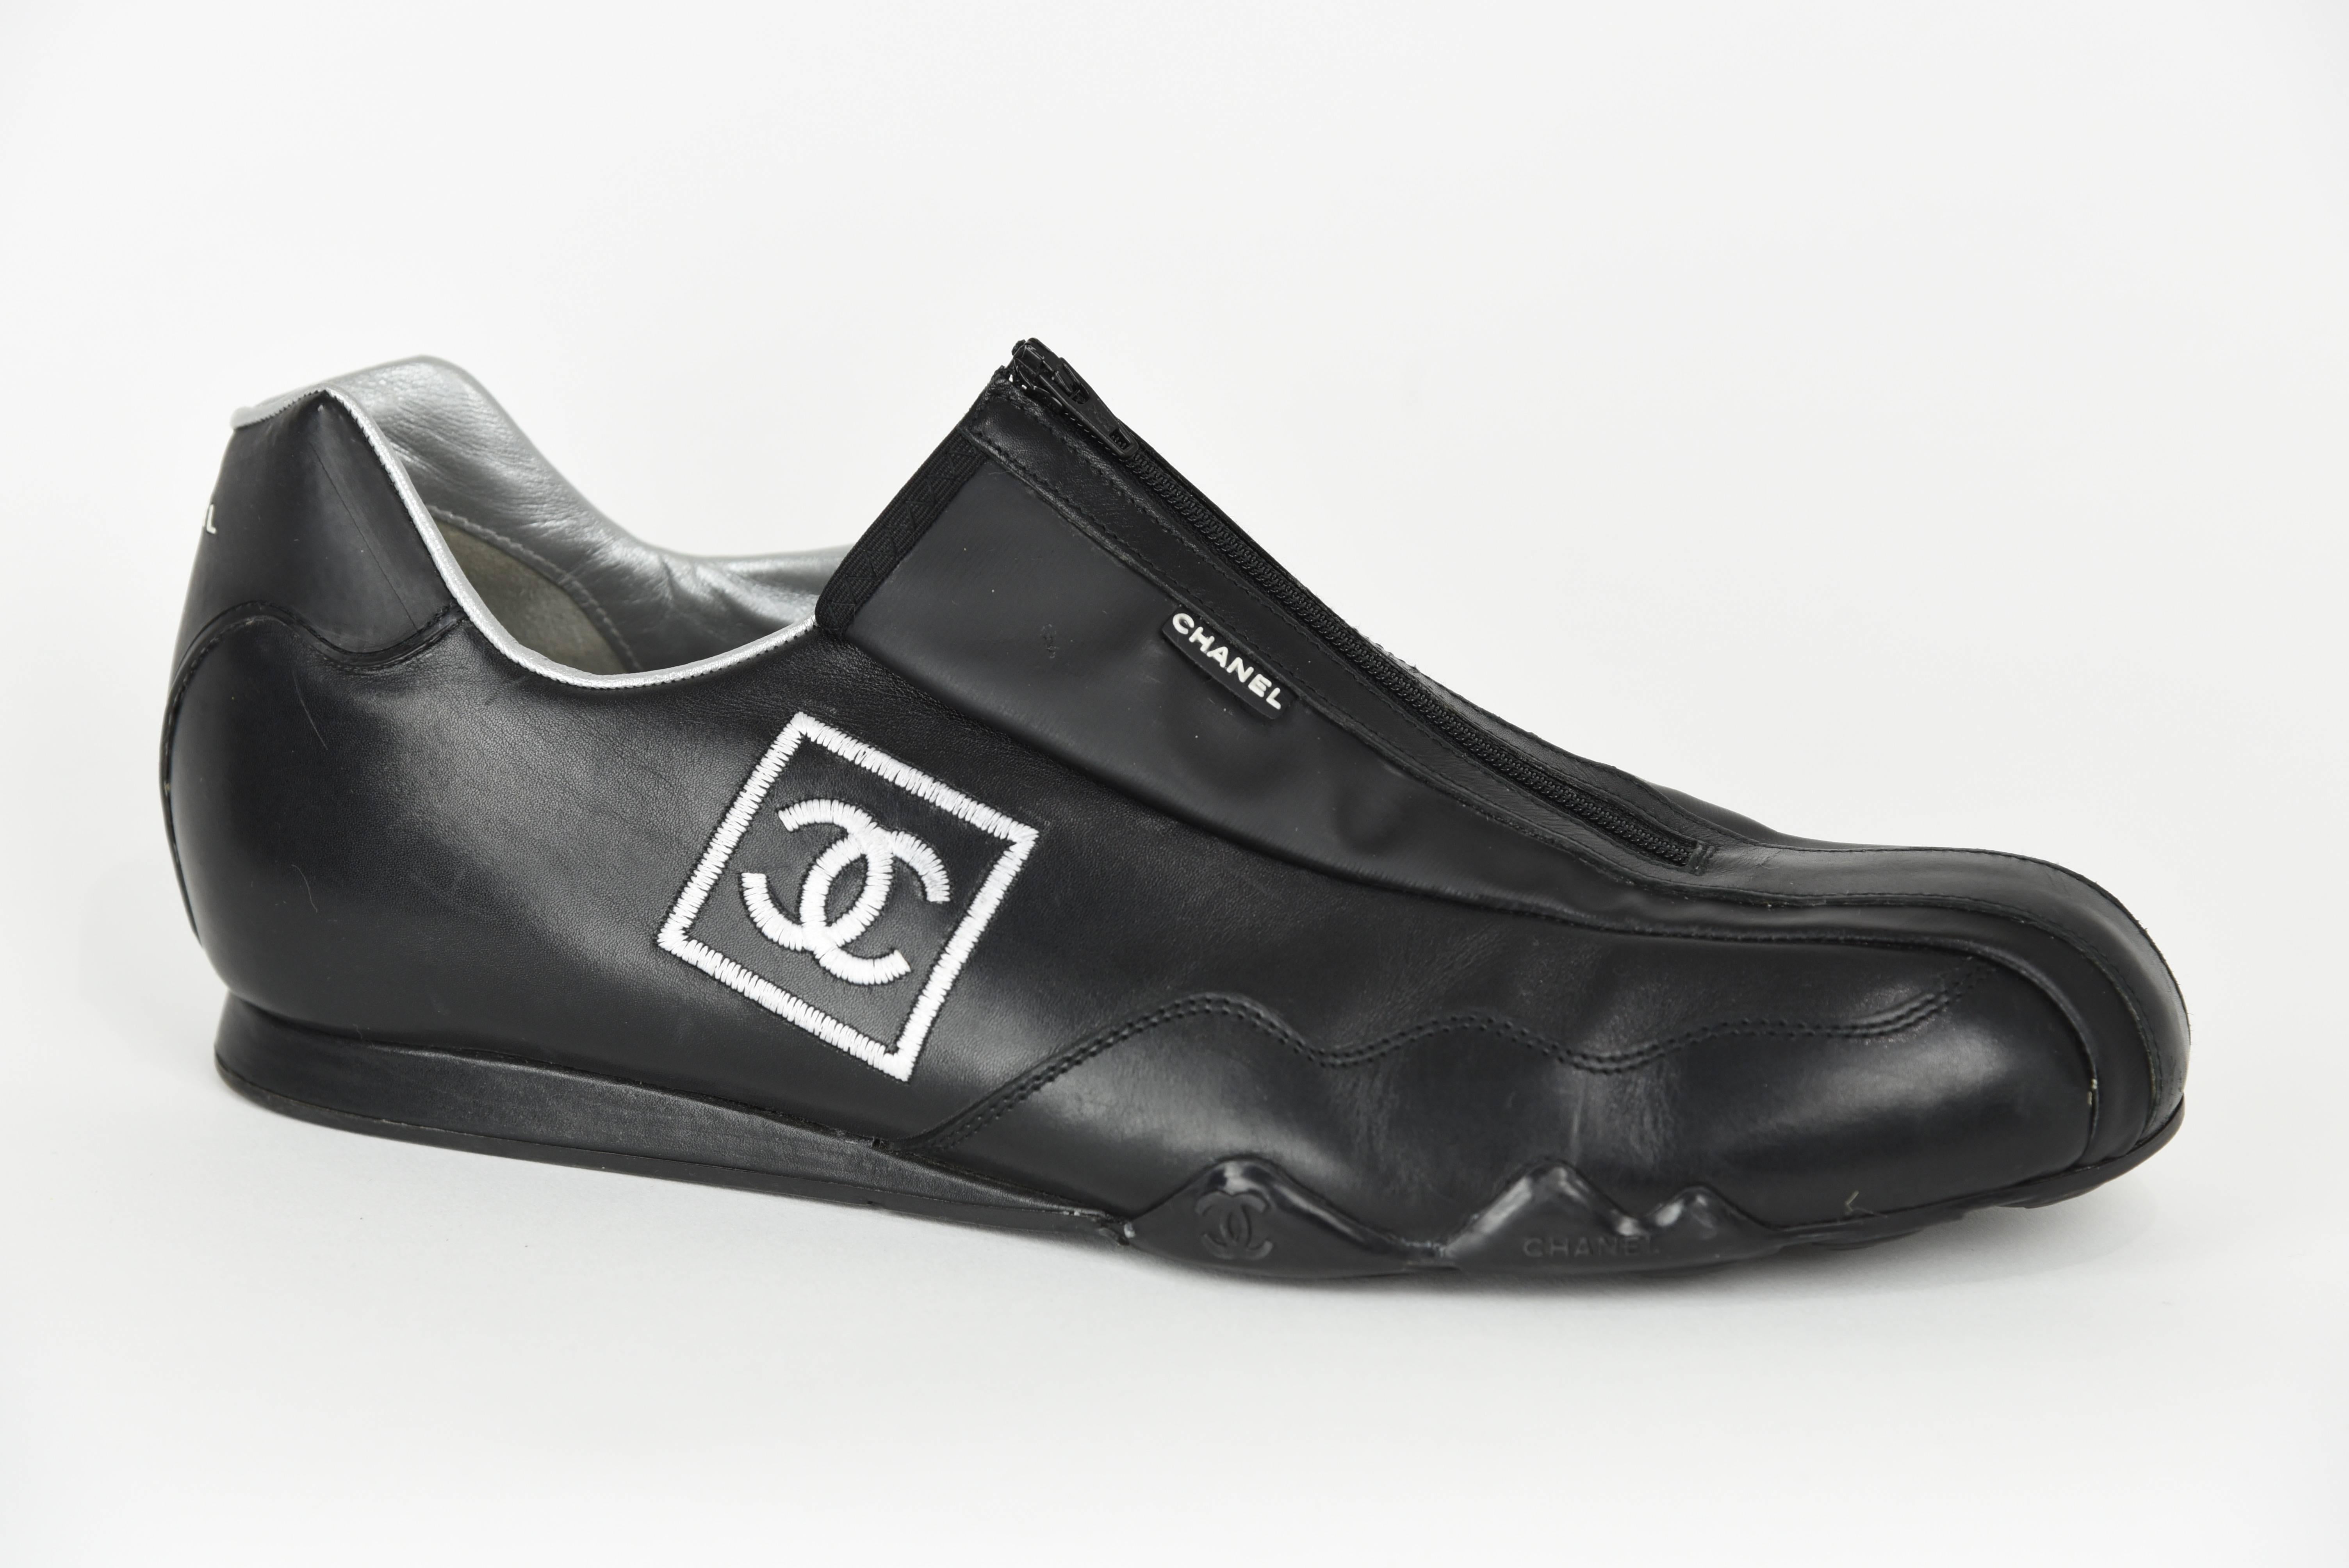 Wear these luxurious and comfortable Chanel black leather shoes with a 1 1/2